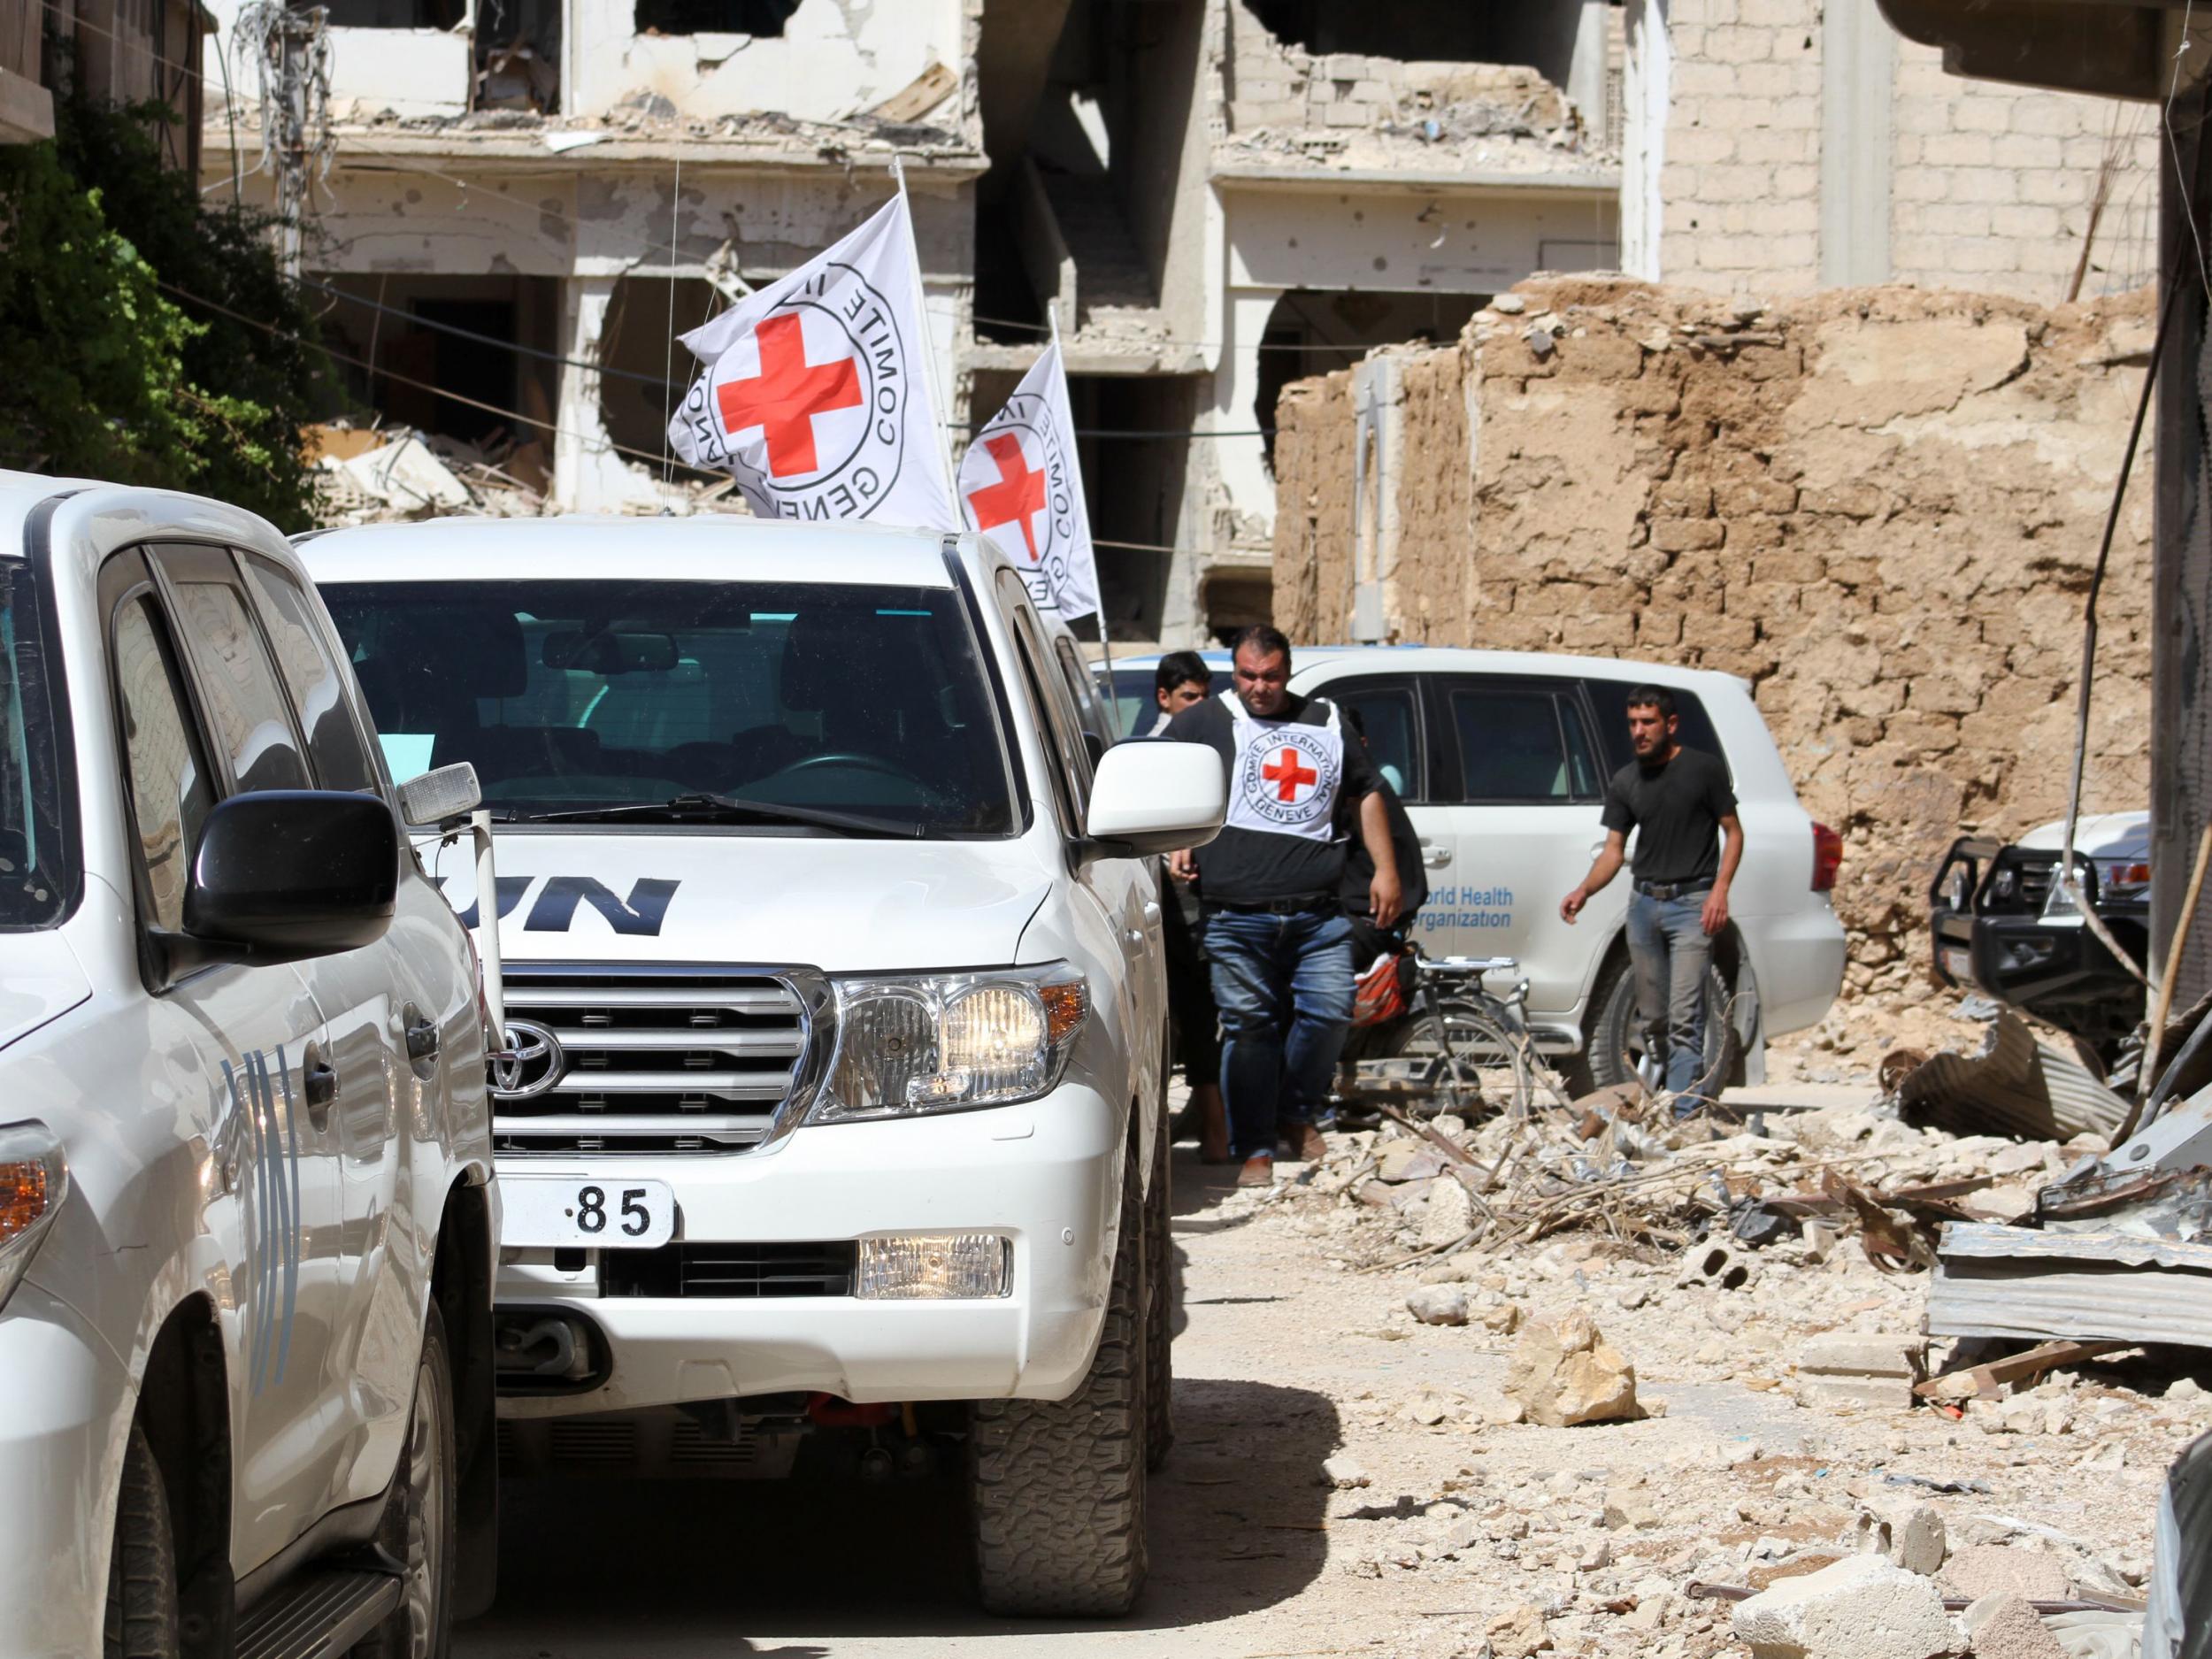 Vehicles of the International Committee of the Red Cross (ICRC) and the United Nations wait on a street after an aid convoy entered the rebel-held Syrian town of Daraya, southwest of the capital Damascus